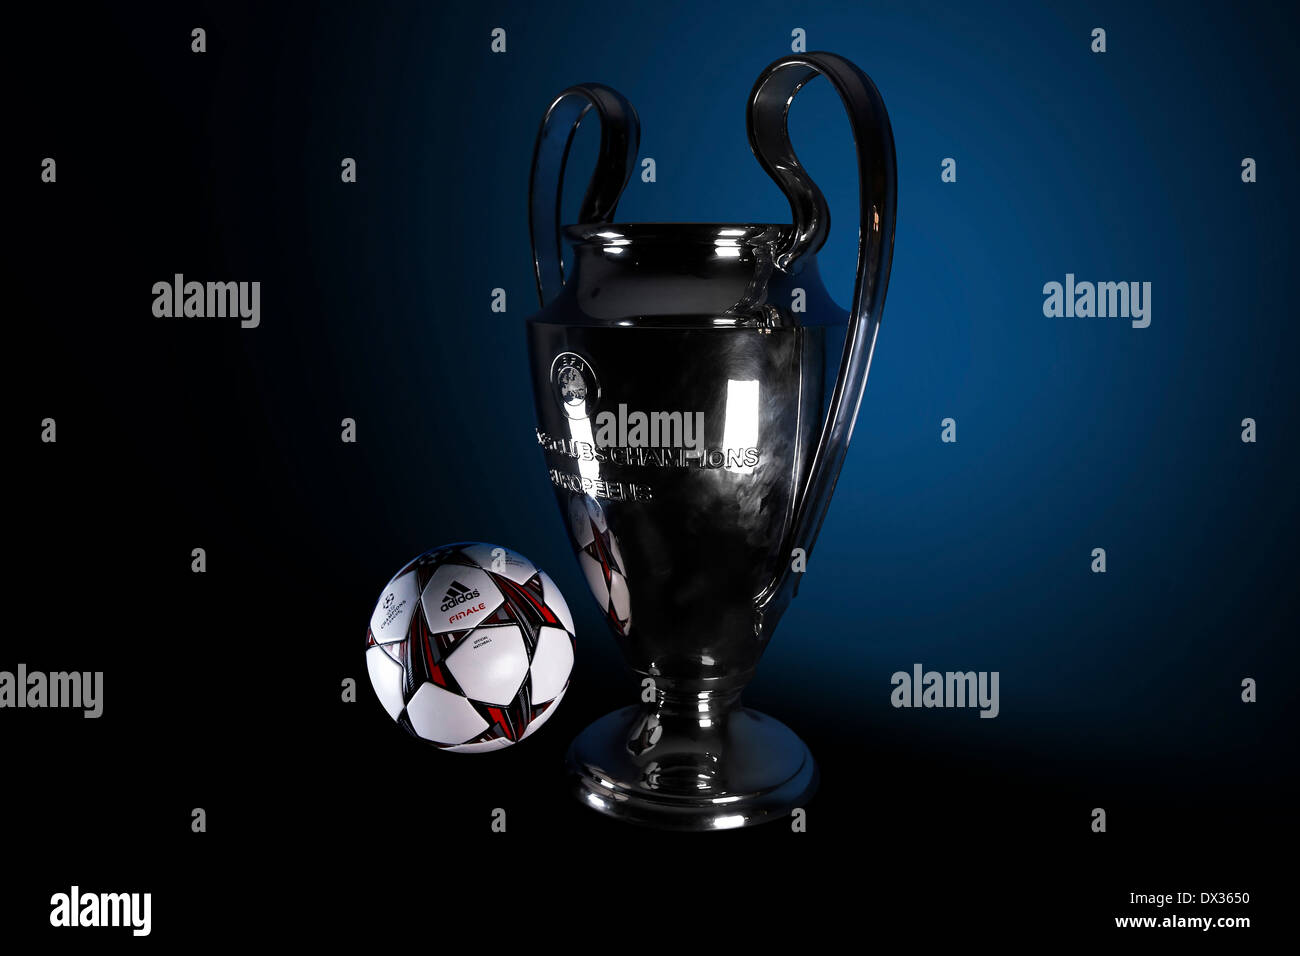 official match ball "Finale" and trophy of the UEFA Champions League Stock  Photo - Alamy